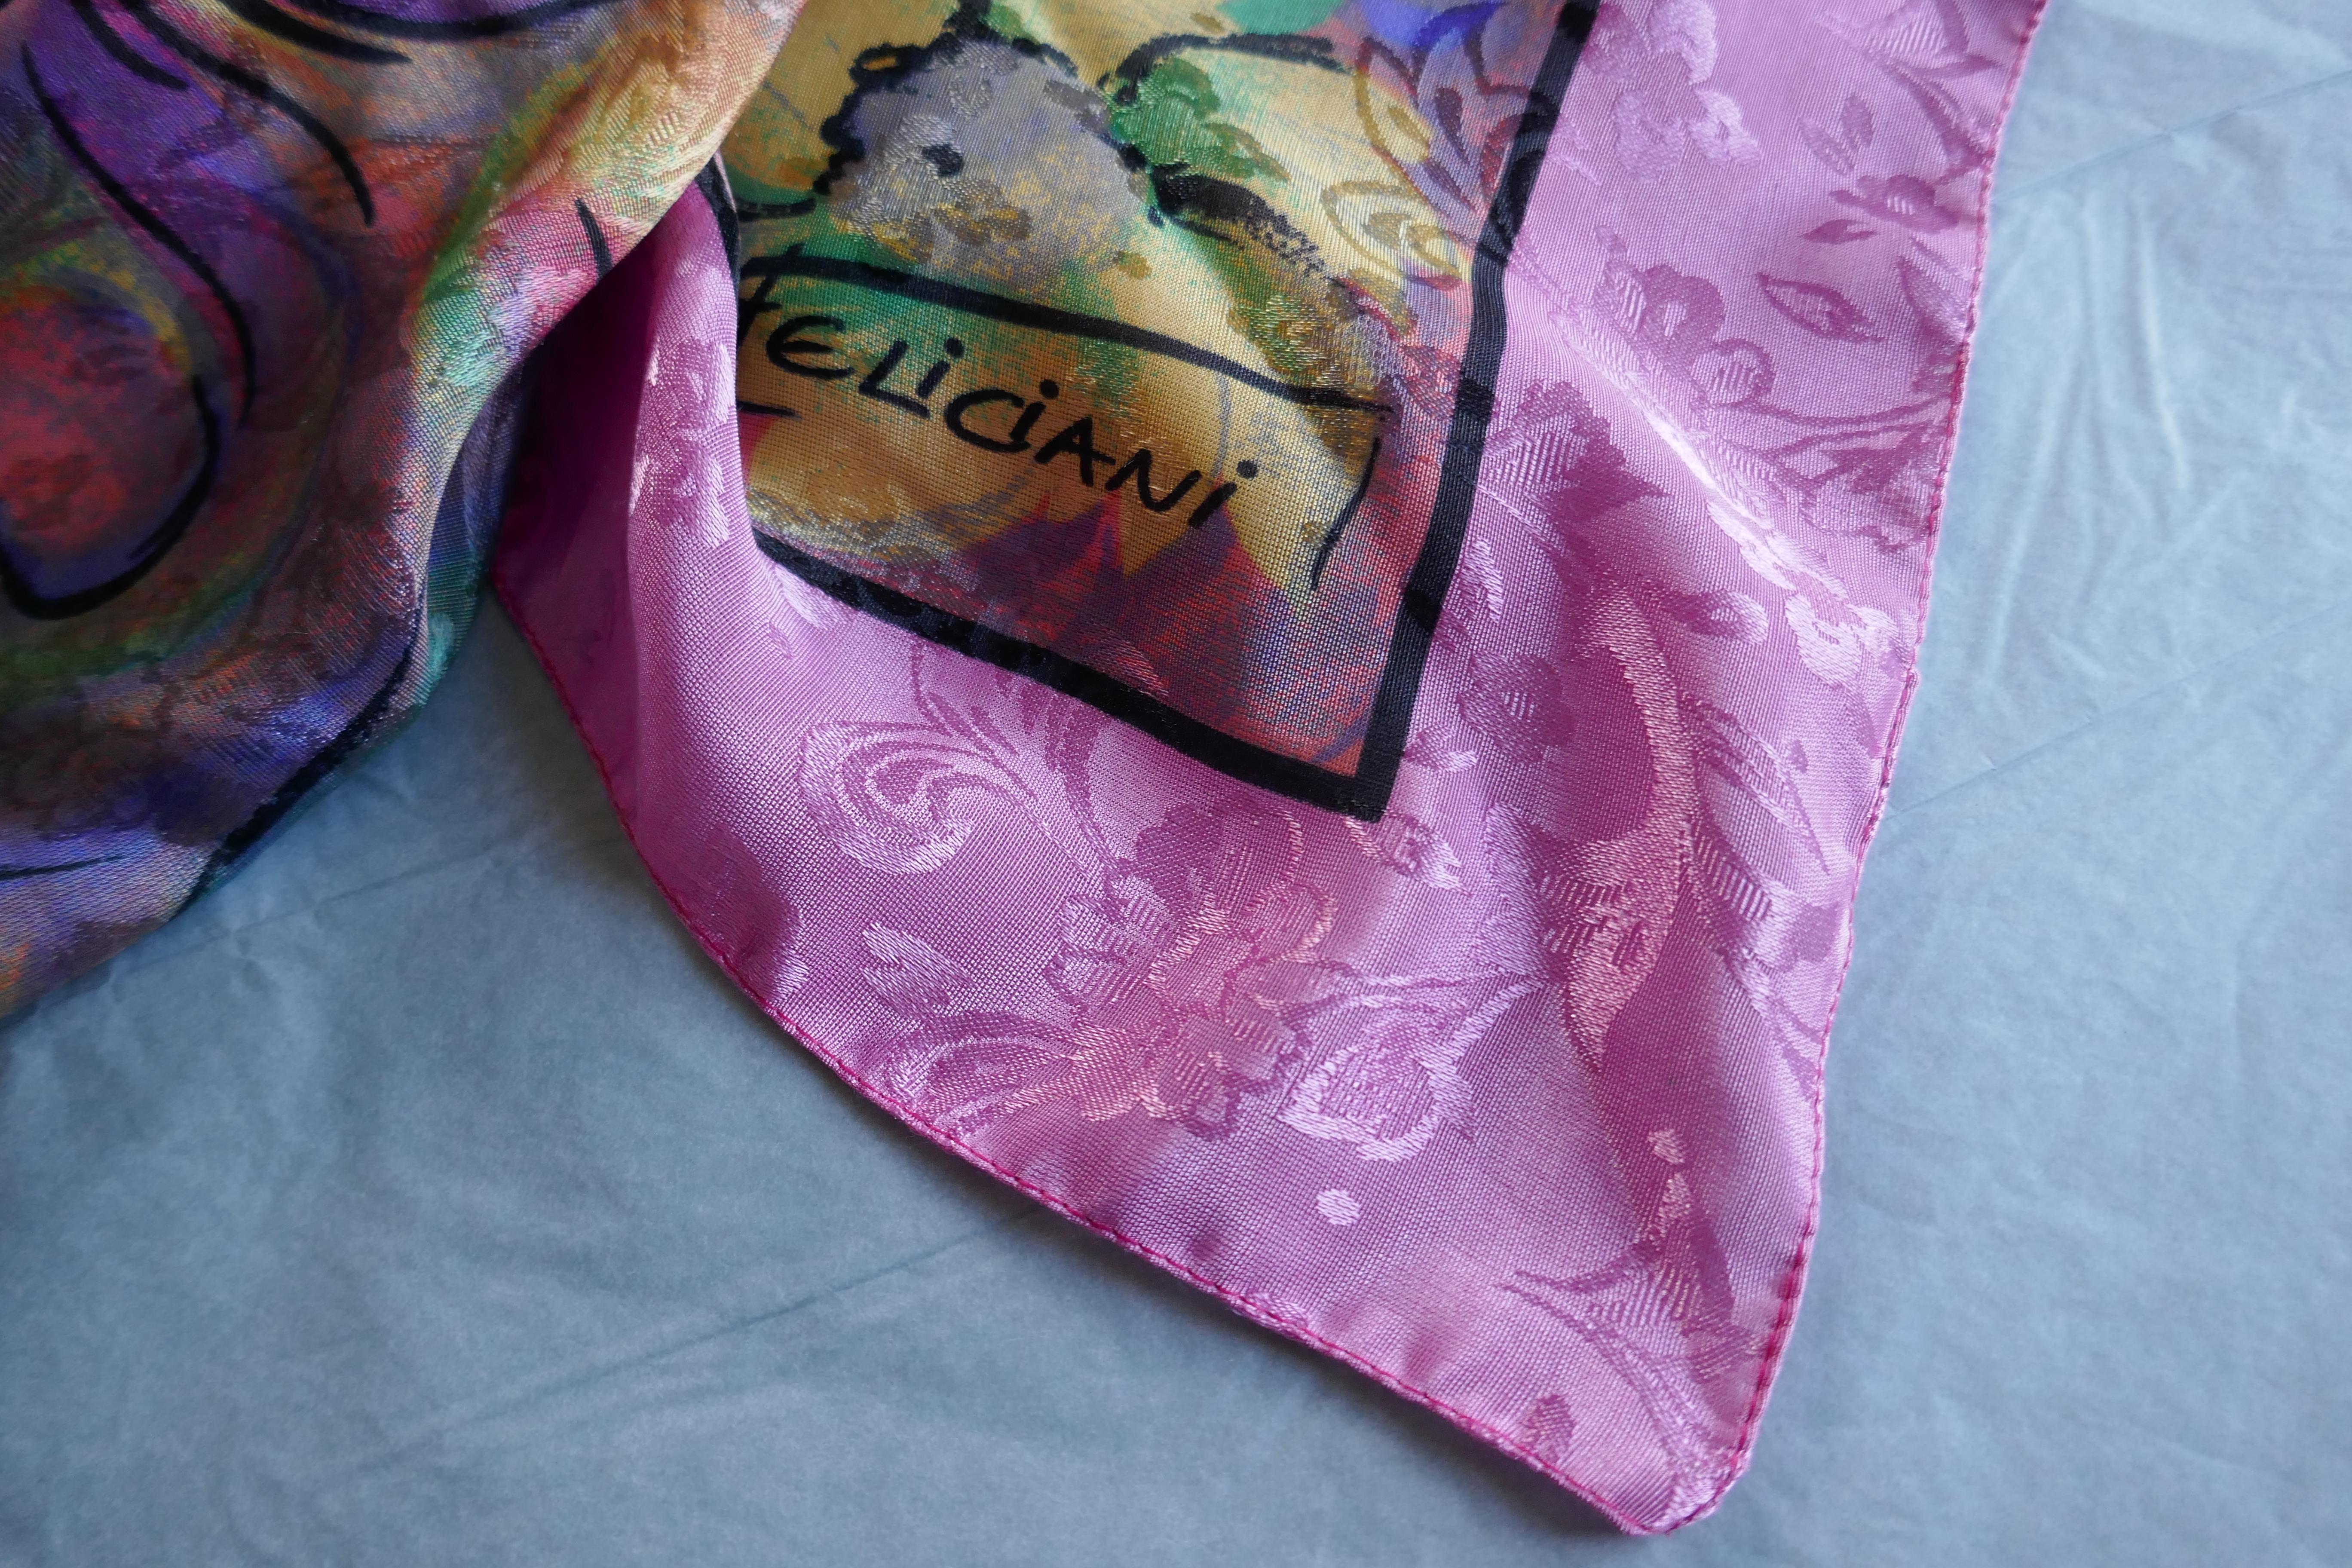 Vintage Art Scarf, Romantic Impressionist Psychedelic from Feliciani  

Charming romantic scene, in Pinks and Psychedelic shades from the Italian Collection
The fabric of this piece is woven with flowers 

Made in Polyester, the Scarf measures 35”x